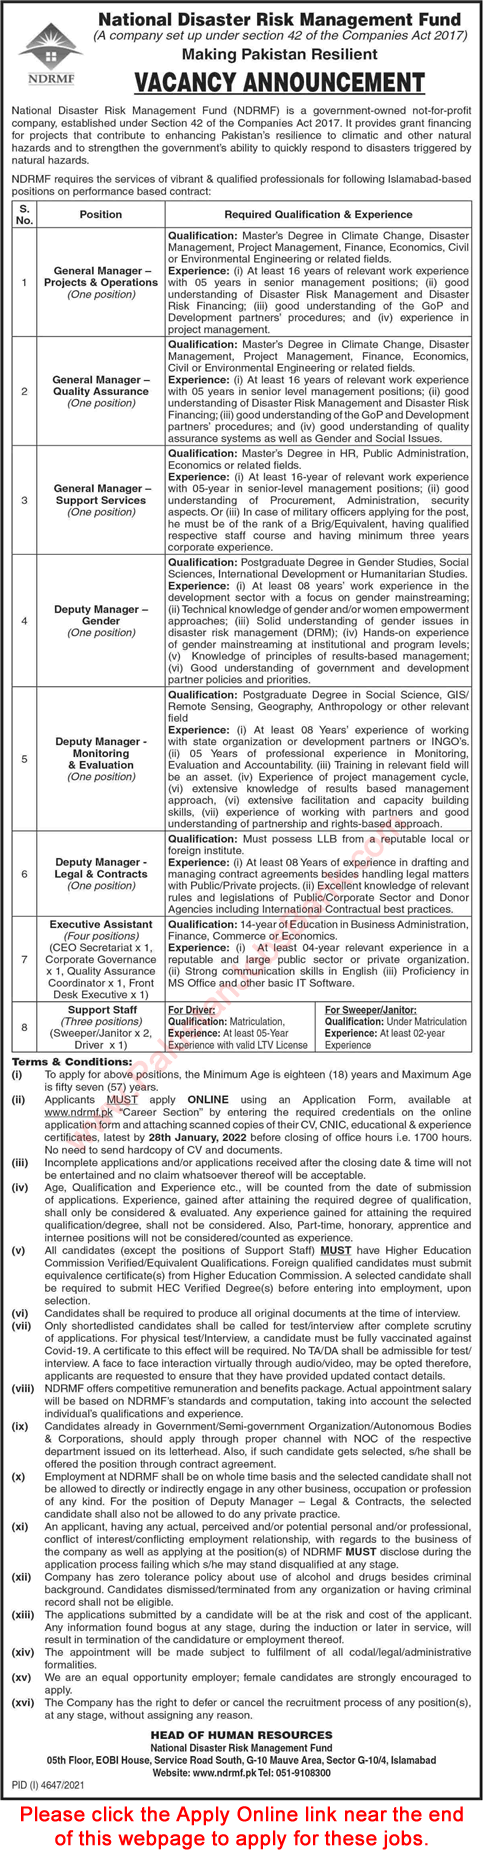 National Disaster Risk Management Fund Jobs 2022 Apply Online Executive Assistants & Others NDRMF Latest